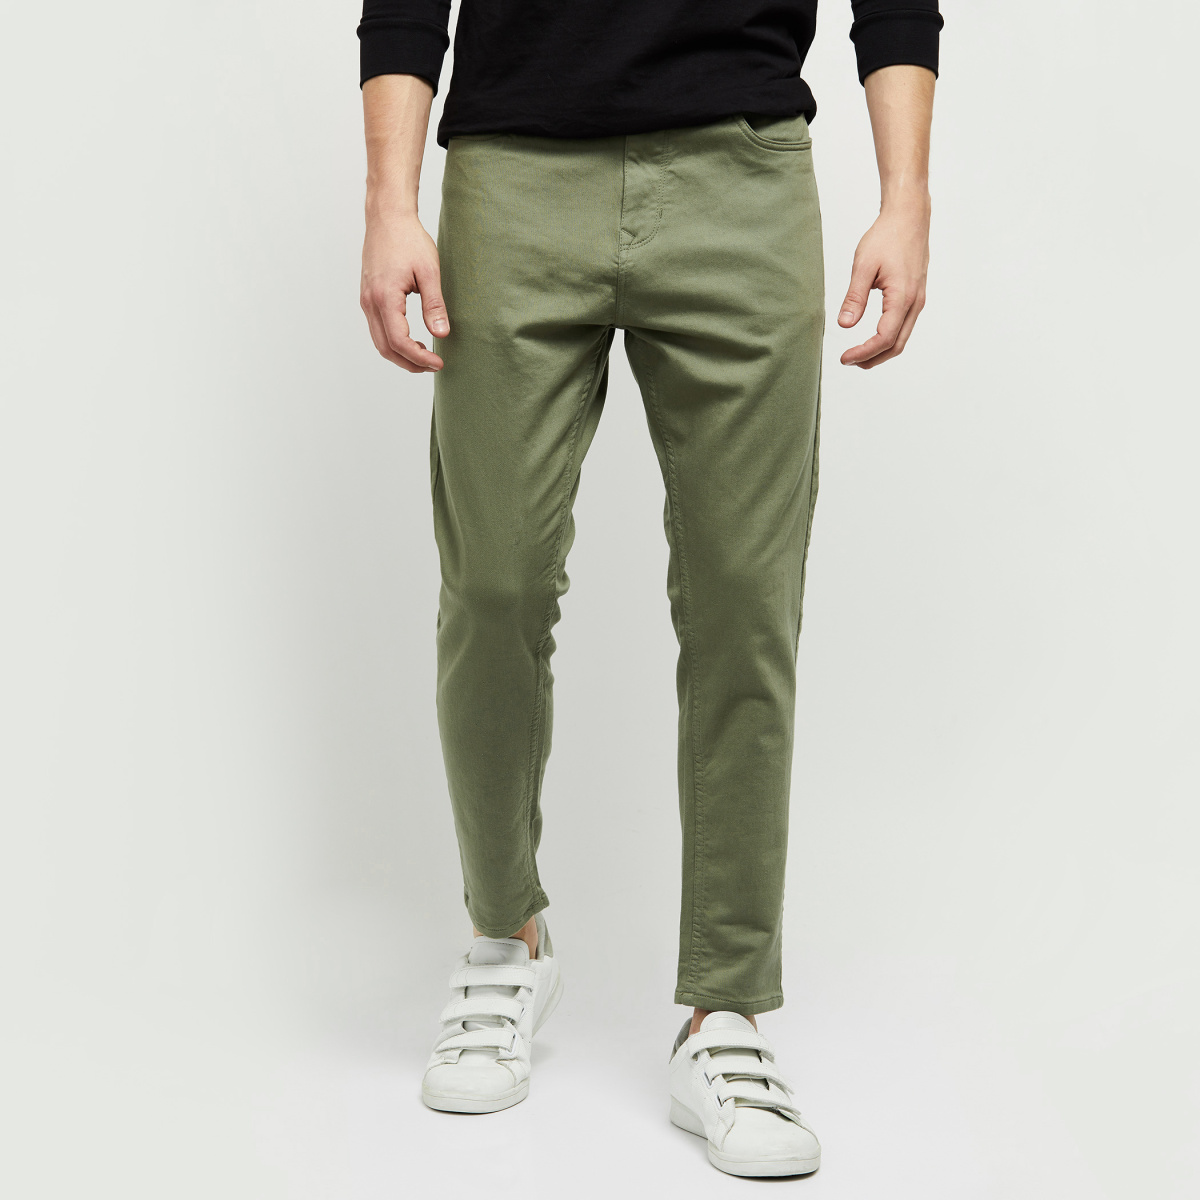 Buy House mens carrot fit pants white Online | Brands For Less